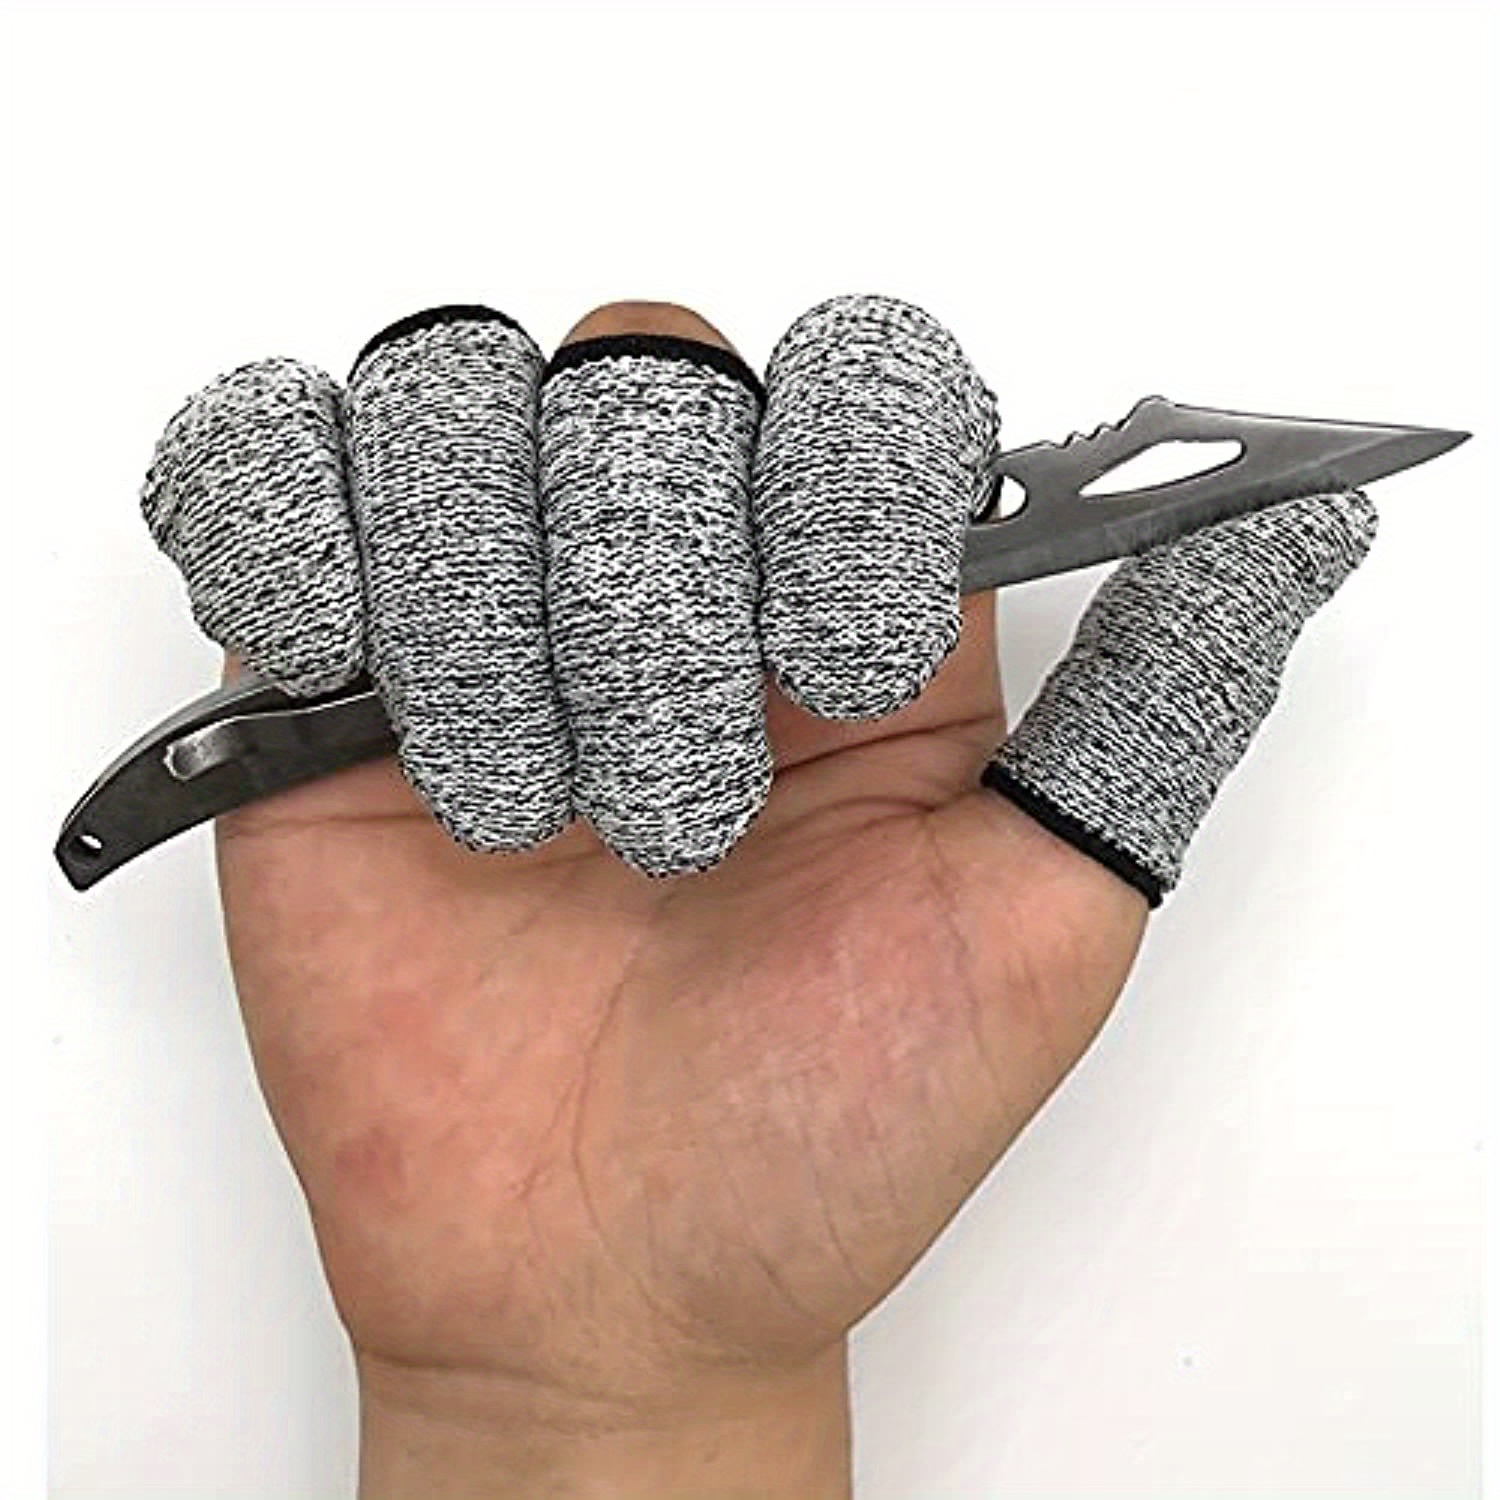 8 Slice Stainless Steel Finger Protector Safe Guard Knife Cutting